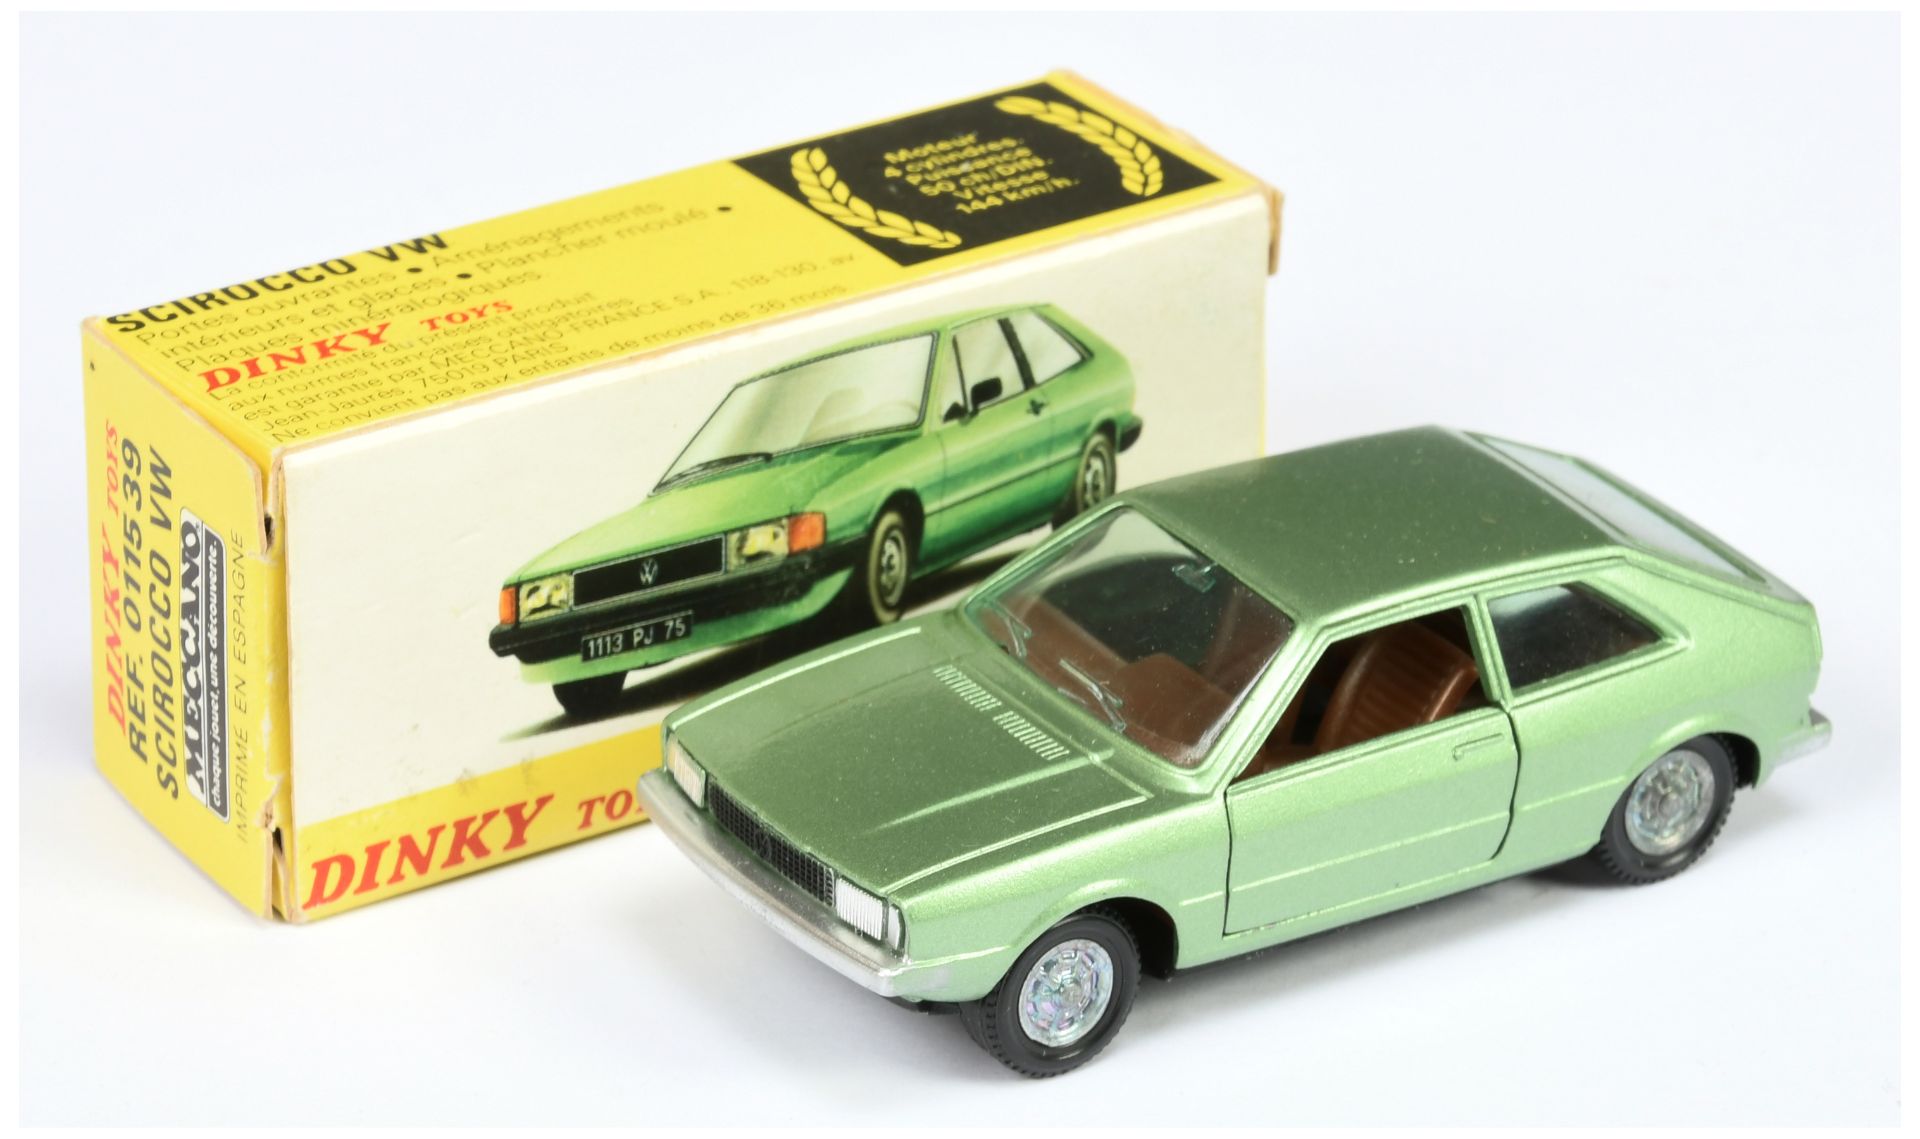 Spanish Dinky Toys 011539 Volkswagen Sirocco - Metallic Green, brown interior, silver trim and ca...